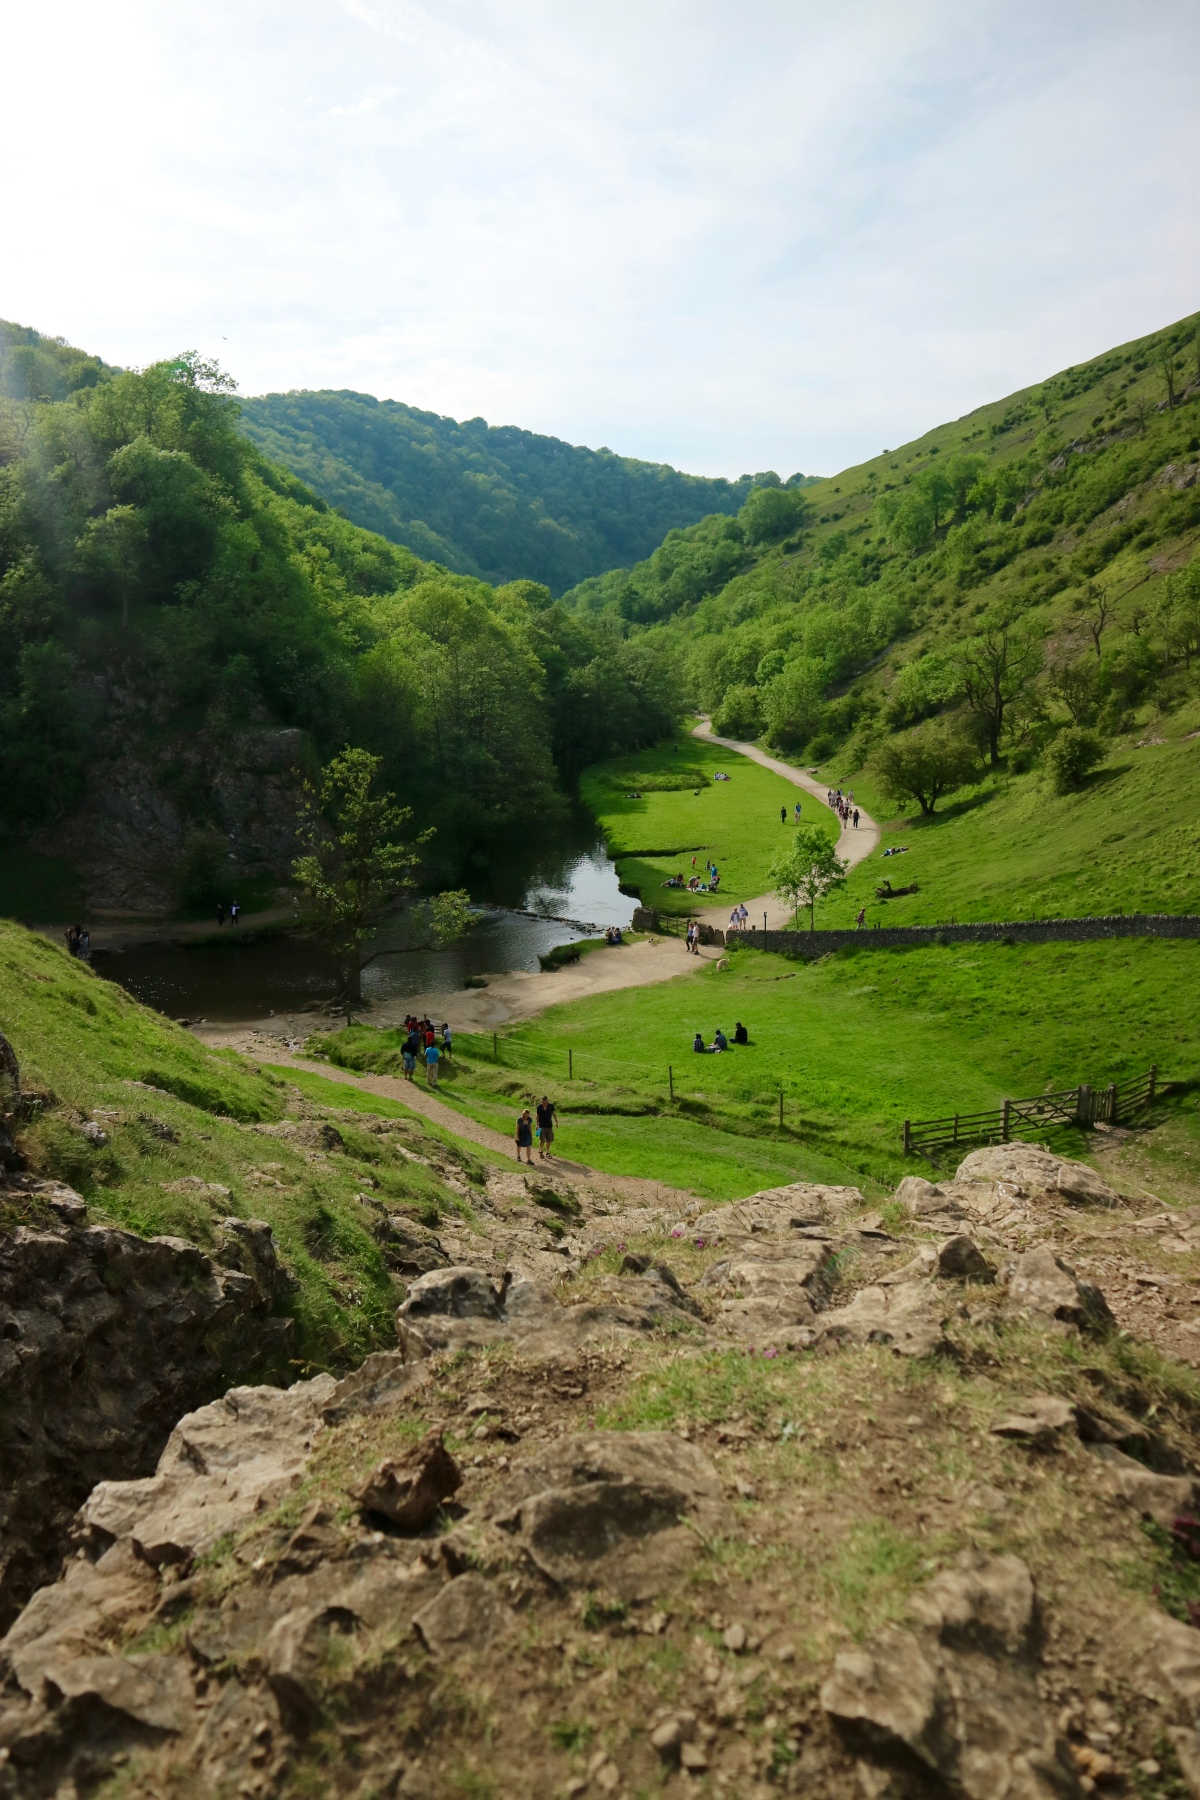 Spring afternoons in Dovedale